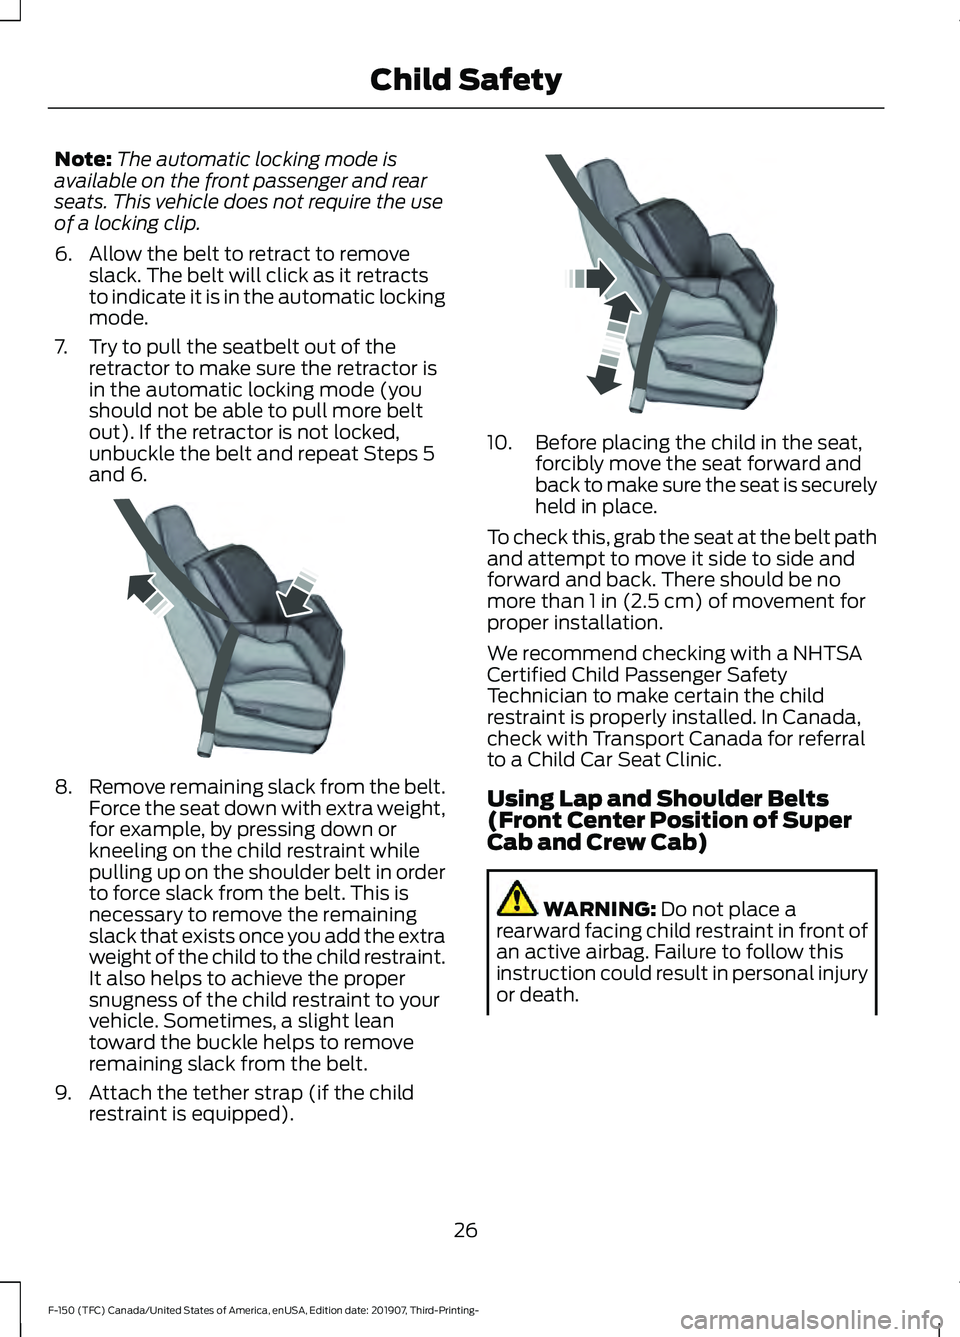 FORD F-150 2020  Owners Manual Note:
The automatic locking mode is
available on the front passenger and rear
seats. This vehicle does not require the use
of a locking clip.
6. Allow the belt to retract to remove slack. The belt wil